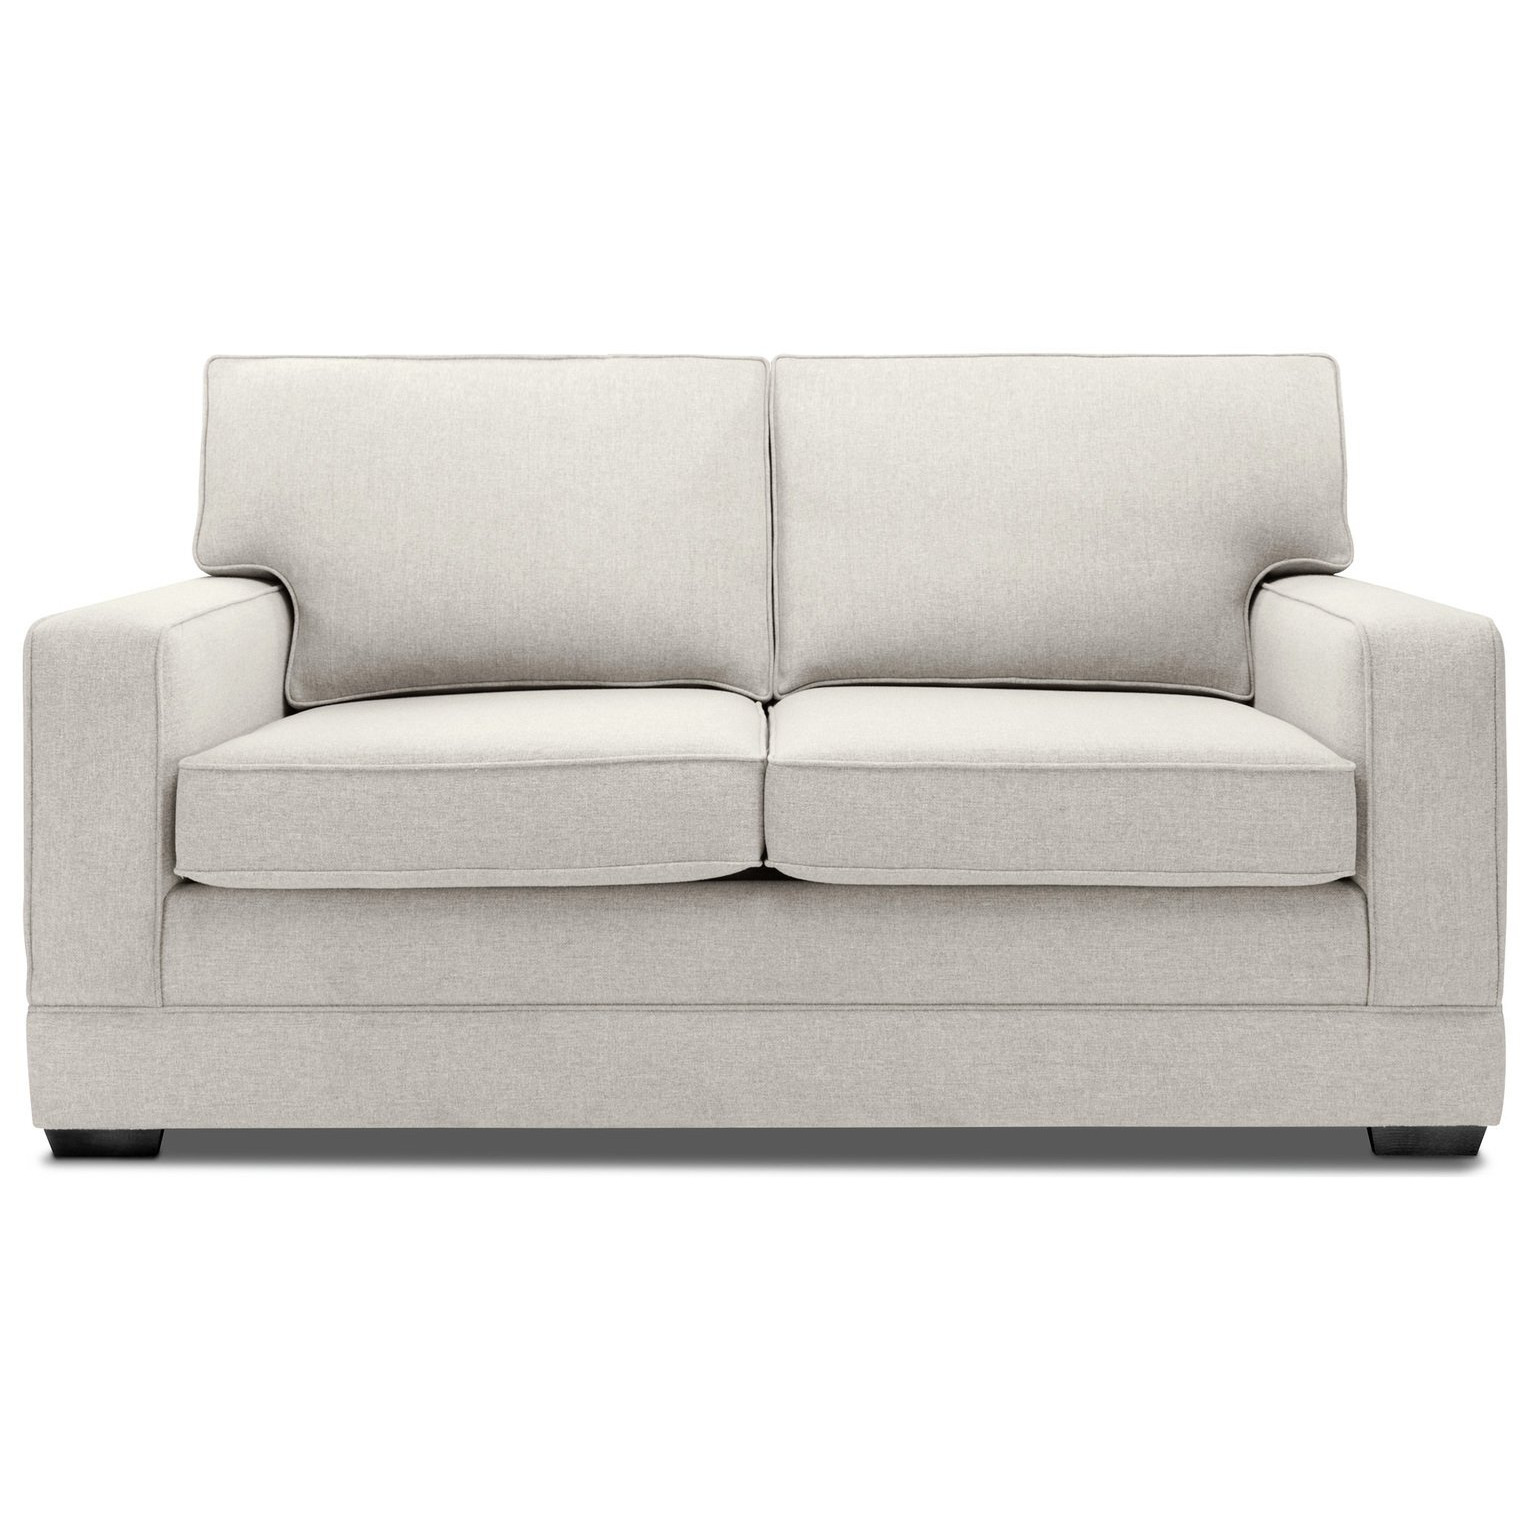 Jay-Be Modern Fabric 2 Seater Sofabed - Mink - image 1